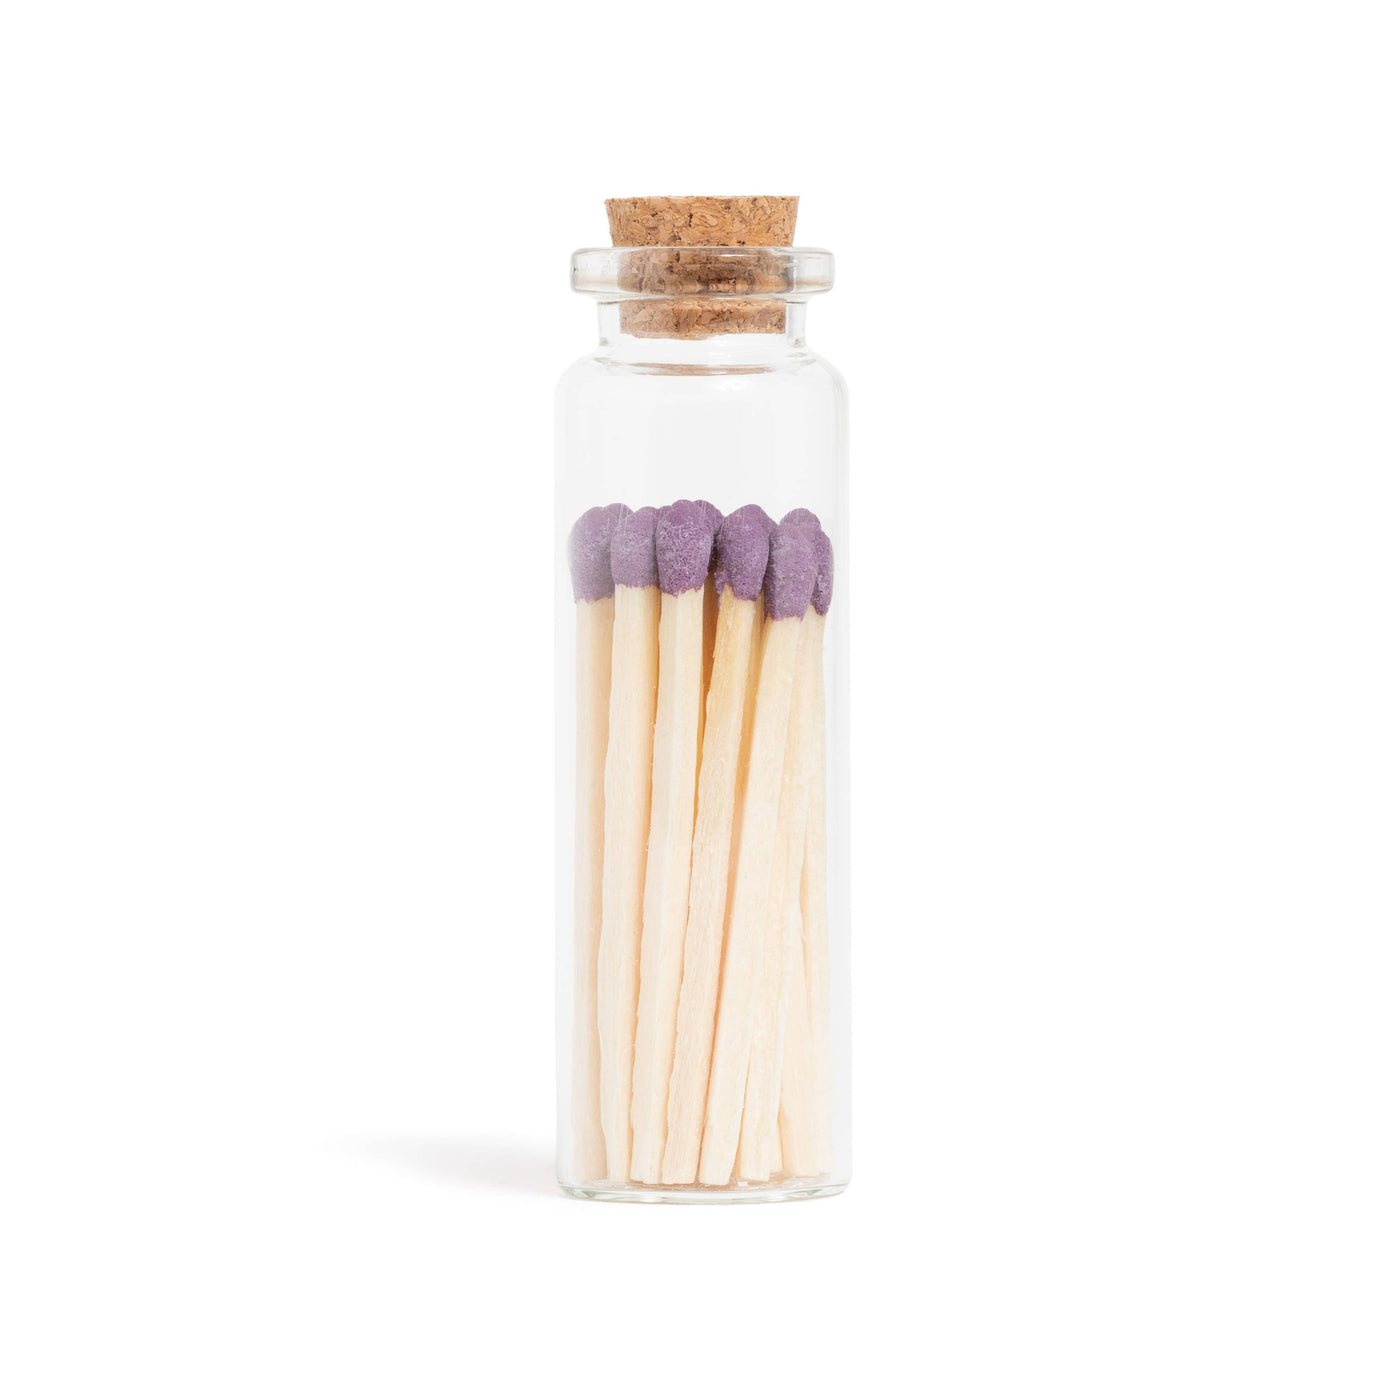 Imperial Purple Matches in Small Corked Vial